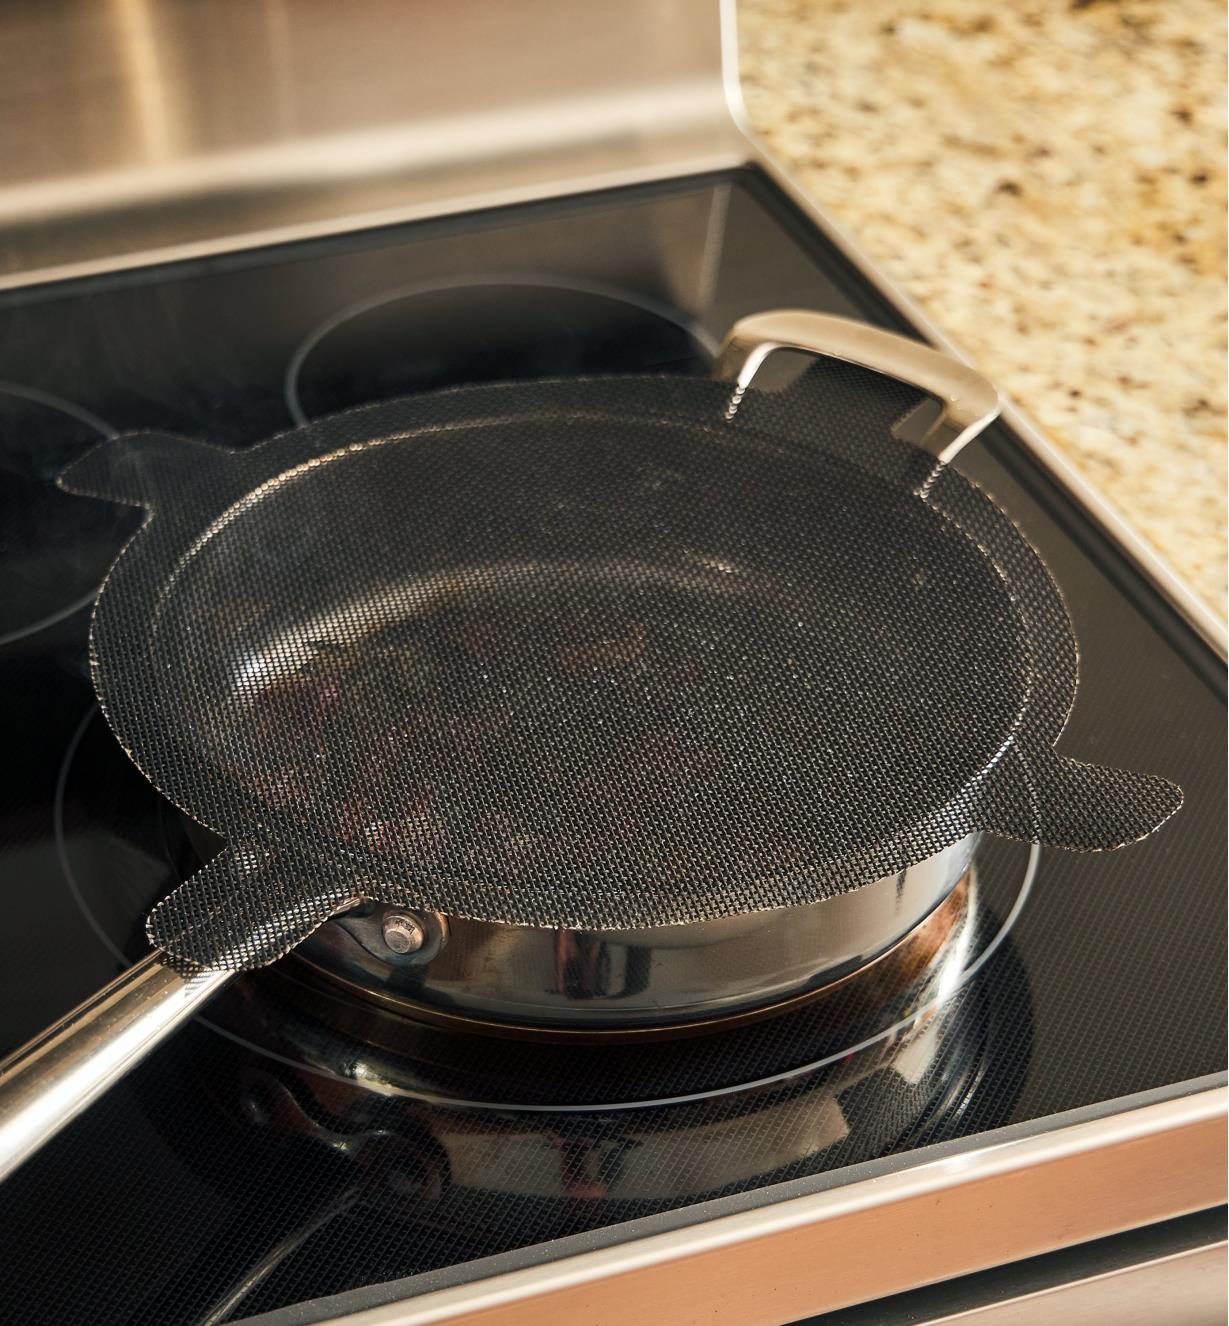 Contents of a pan are visible through the semi-transparent splatter screen